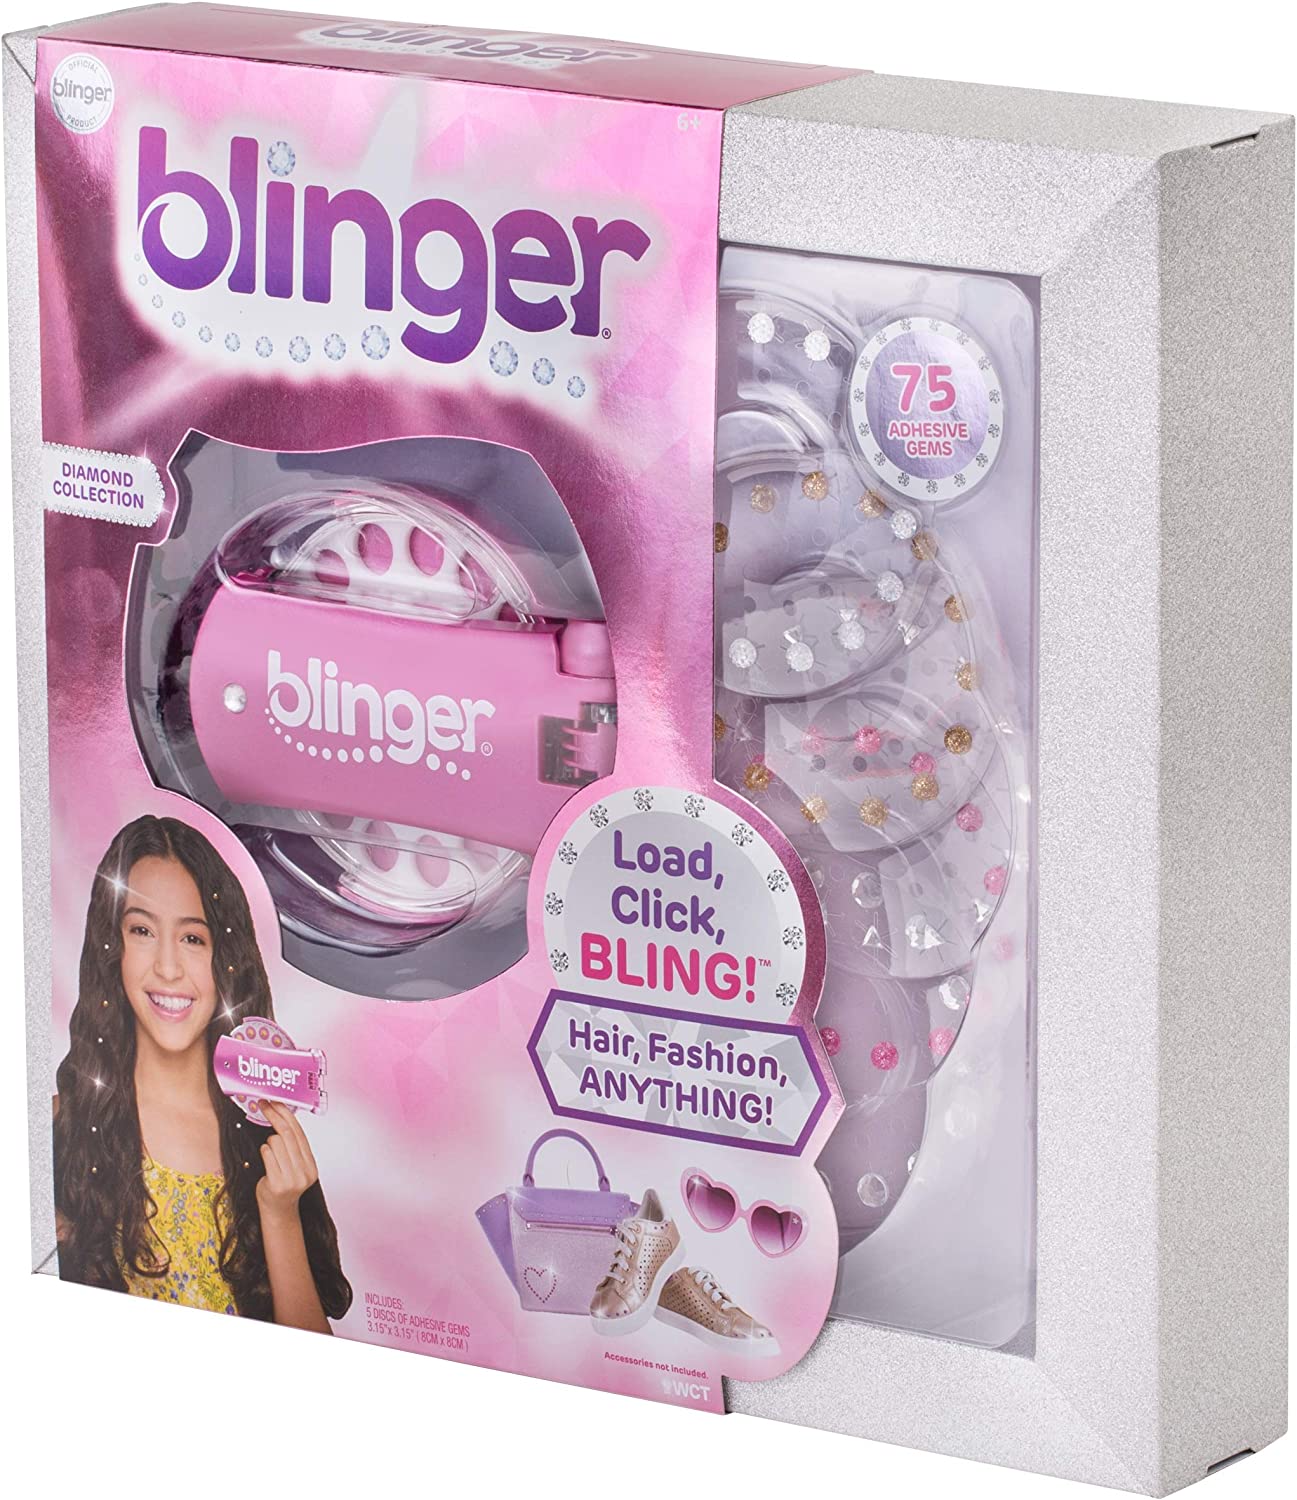 Blinger Diamond Collection Bright Pink with 5 Discs & Glam Styling Tool - image 2 of 7